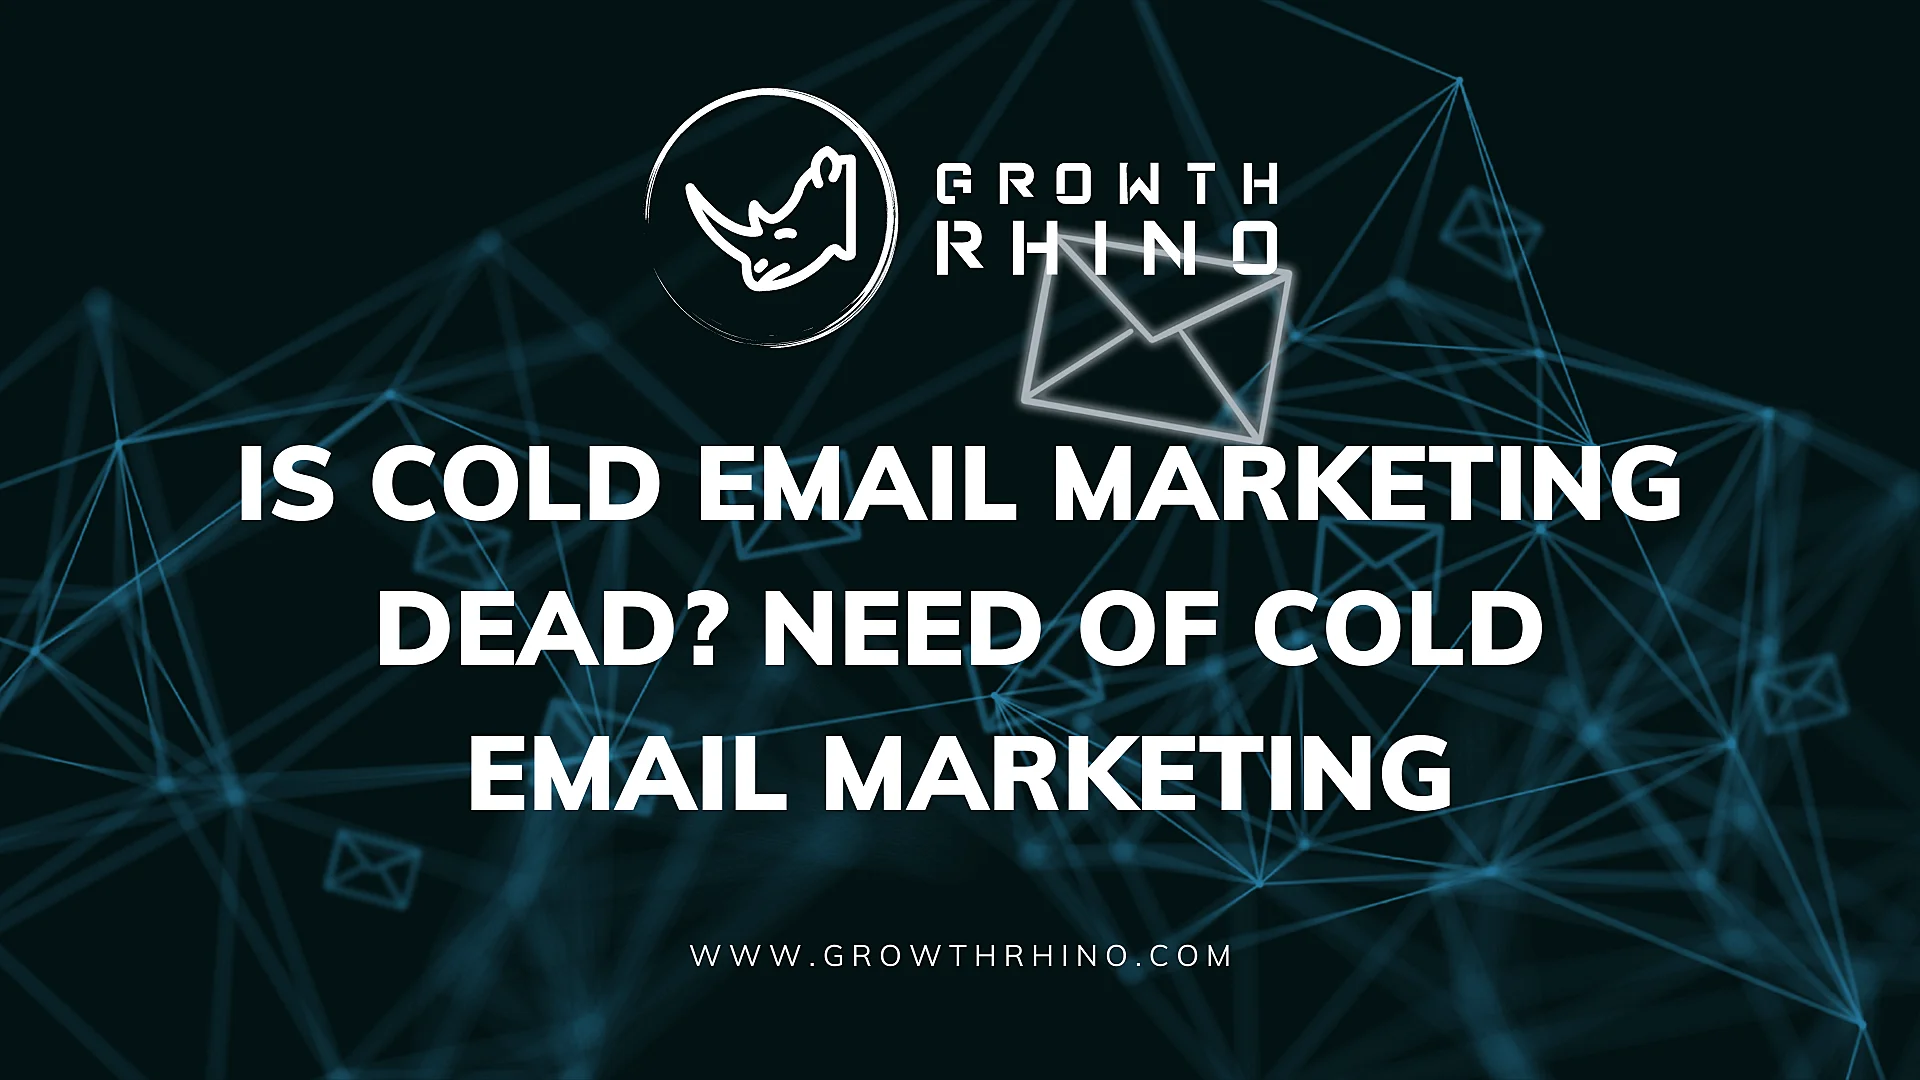 Is Cold Email Marketing Dead? Need of Cold Email Marketing